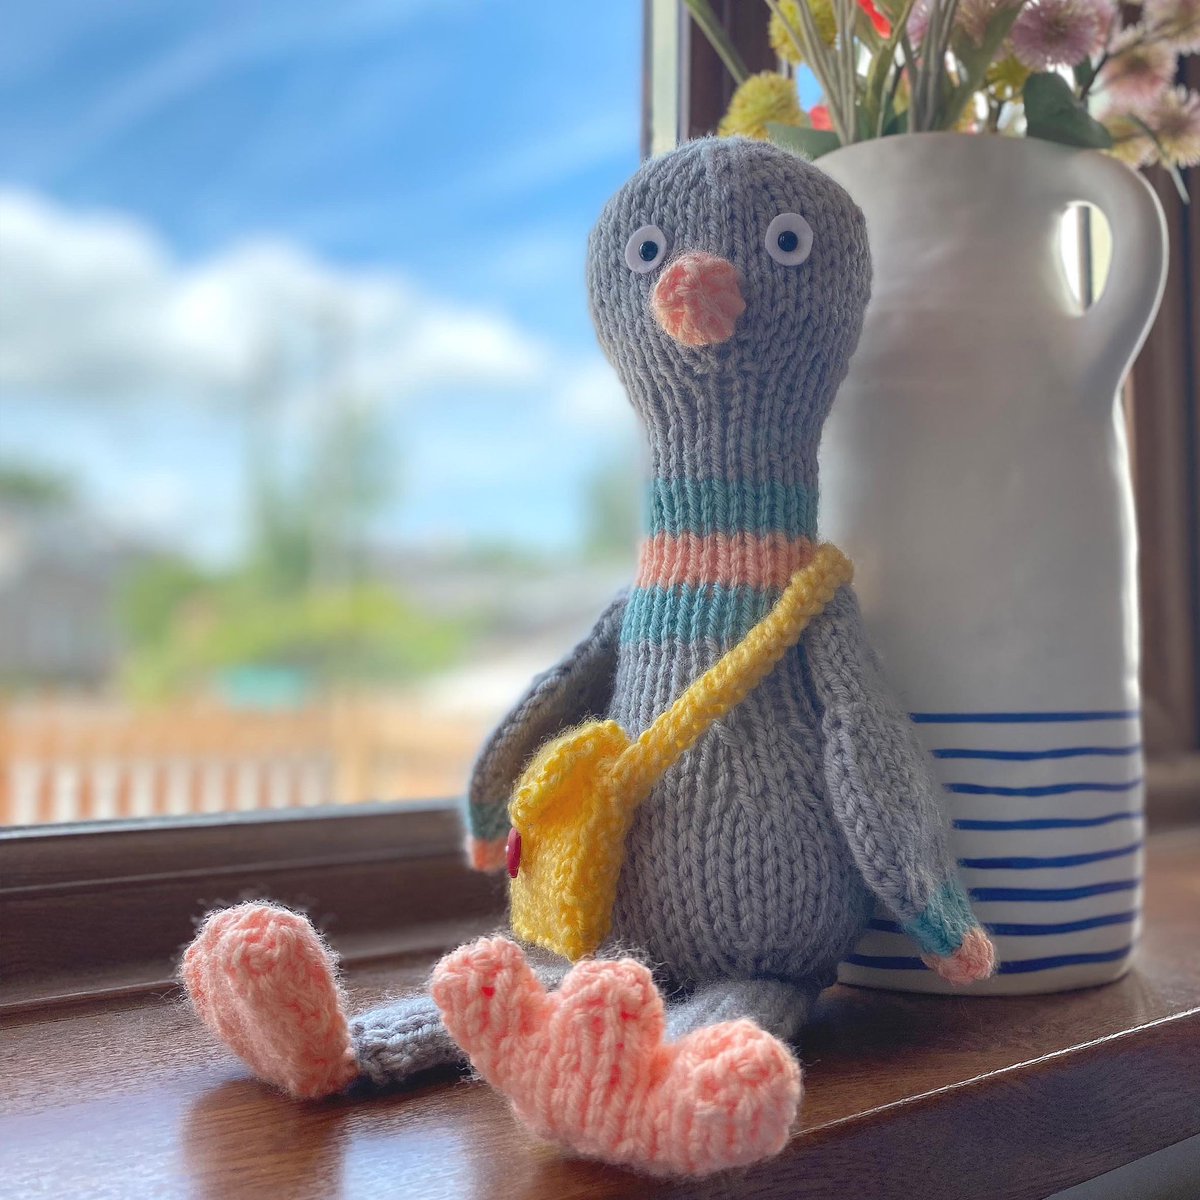 Did you know that pigeons can fly their way back to their nests from 1300 miles away? This Messenger Pigeon is a bit less athletic than that, but he does have a handy pouch to carry your messages in 🐦